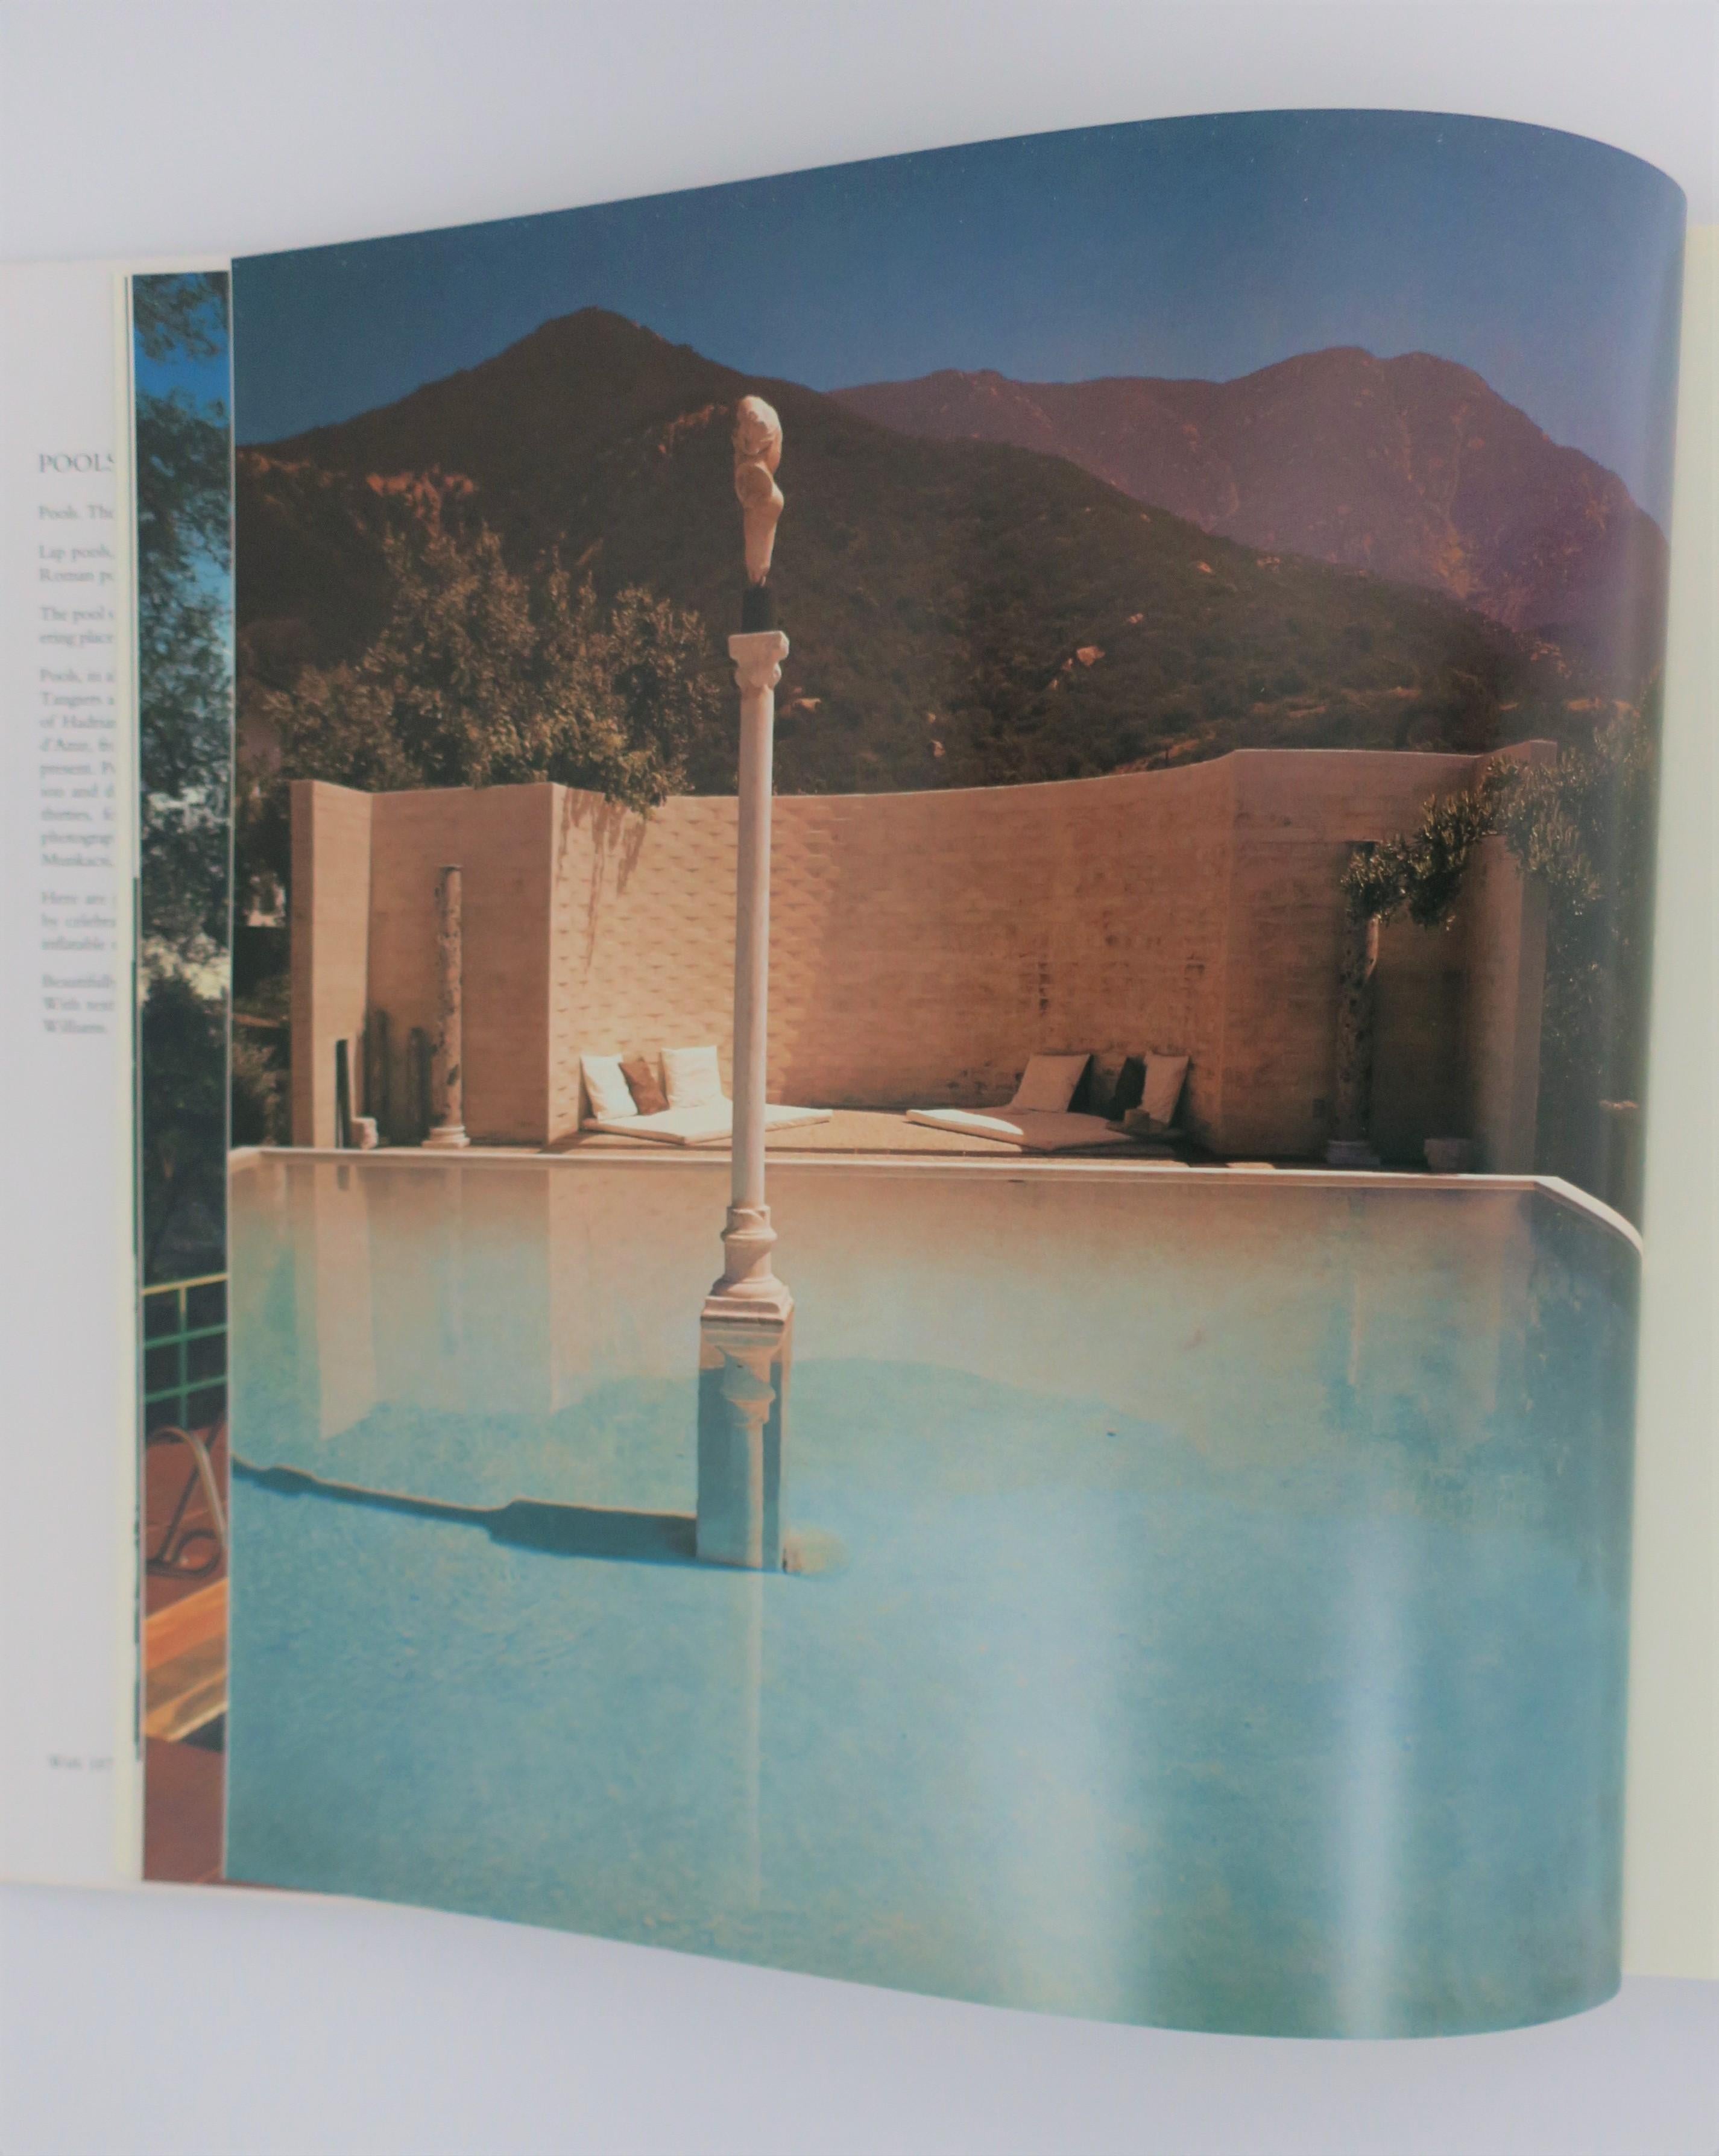 Pools by Kelly Klein an Architecture Coffee Table or Library Book 4